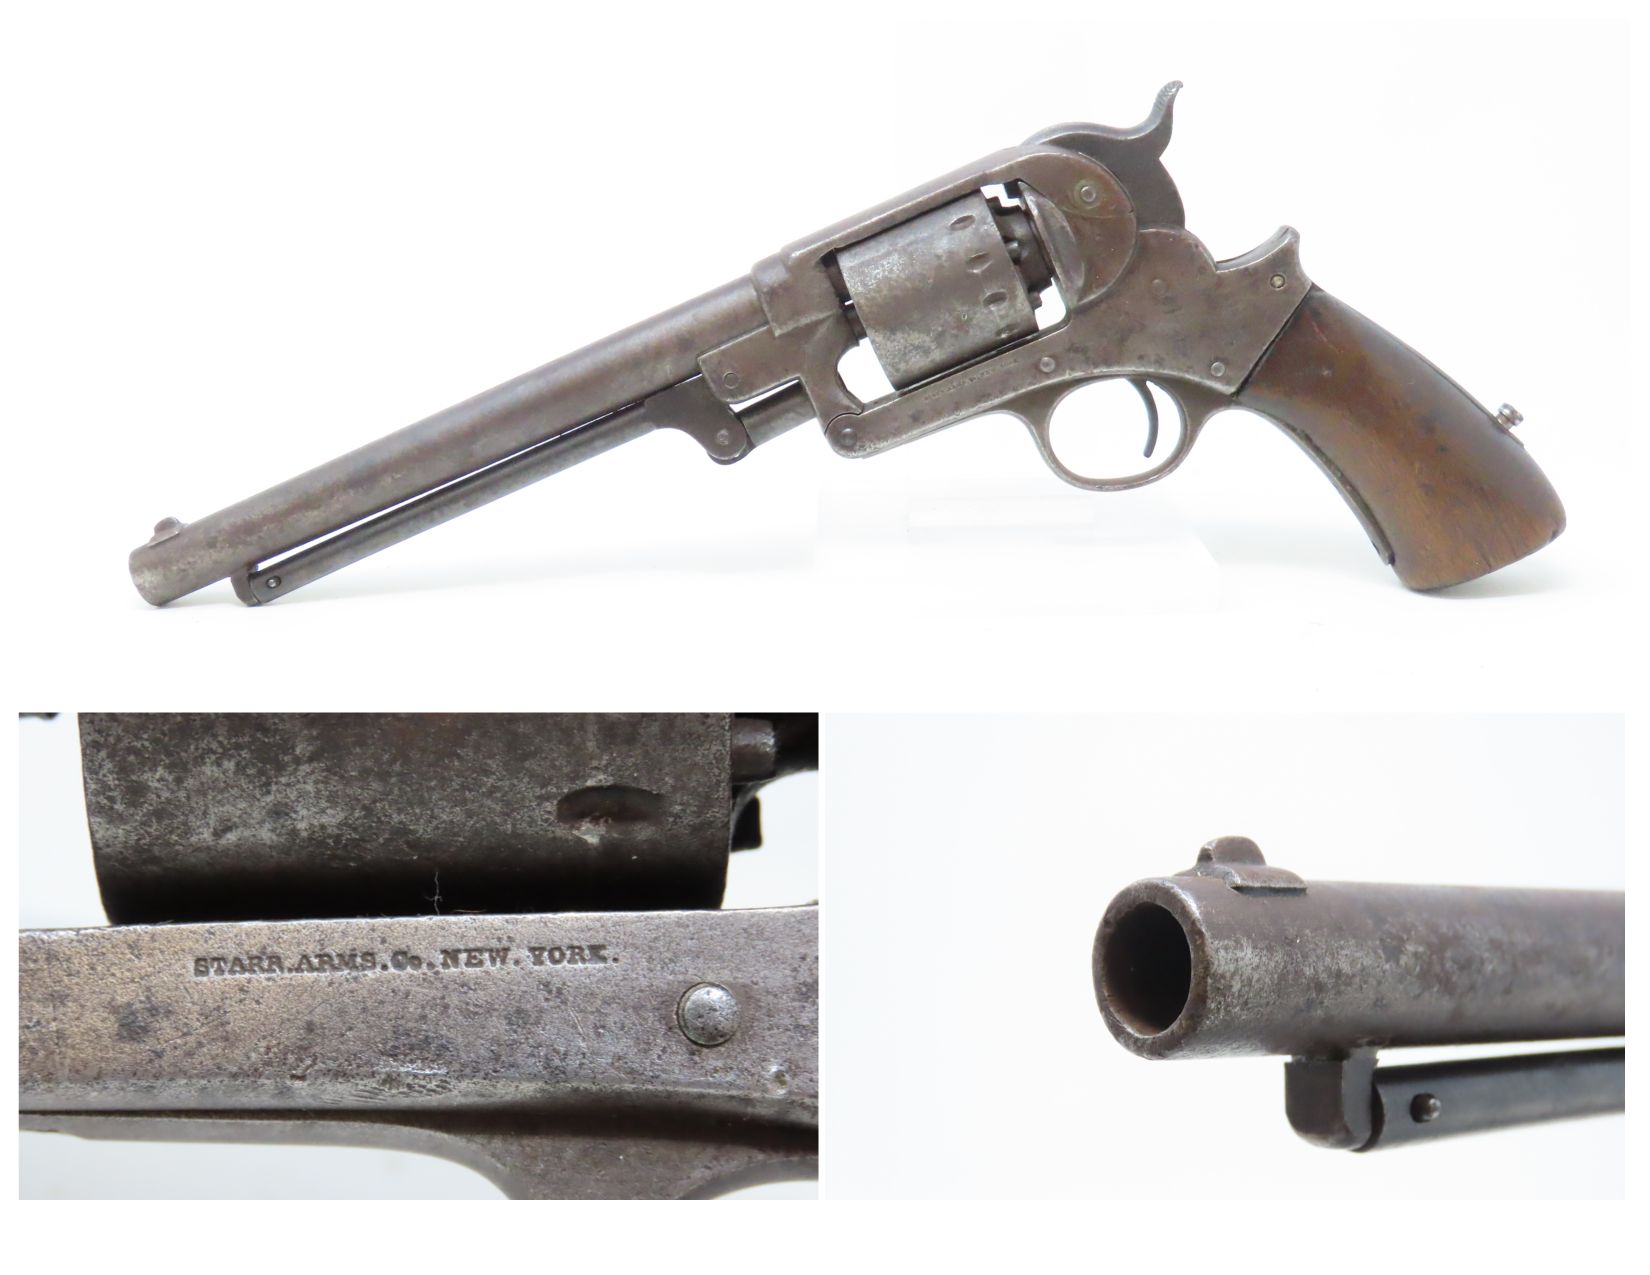 Antique SMITH & WESSON .44 DOUBLE ACTION First Model Revolver .44 RUSSIAN  SINGLE or DOUBLE ACTION .44 Caliber Revolver